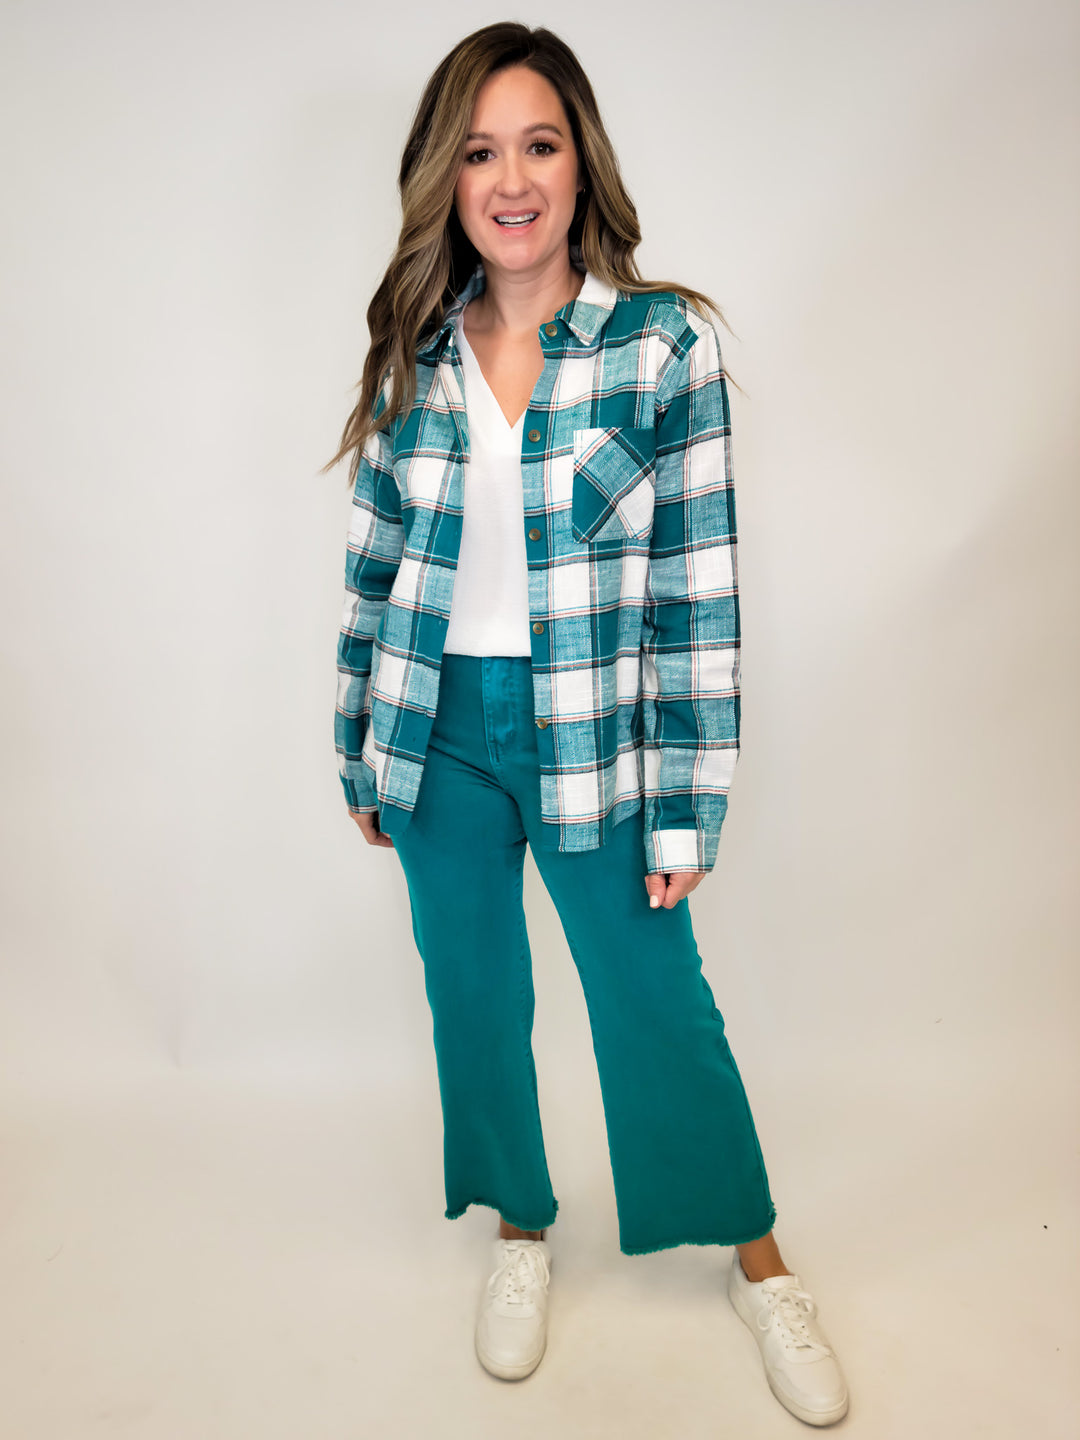 PLAID BUTTON UP TOP - TEAL